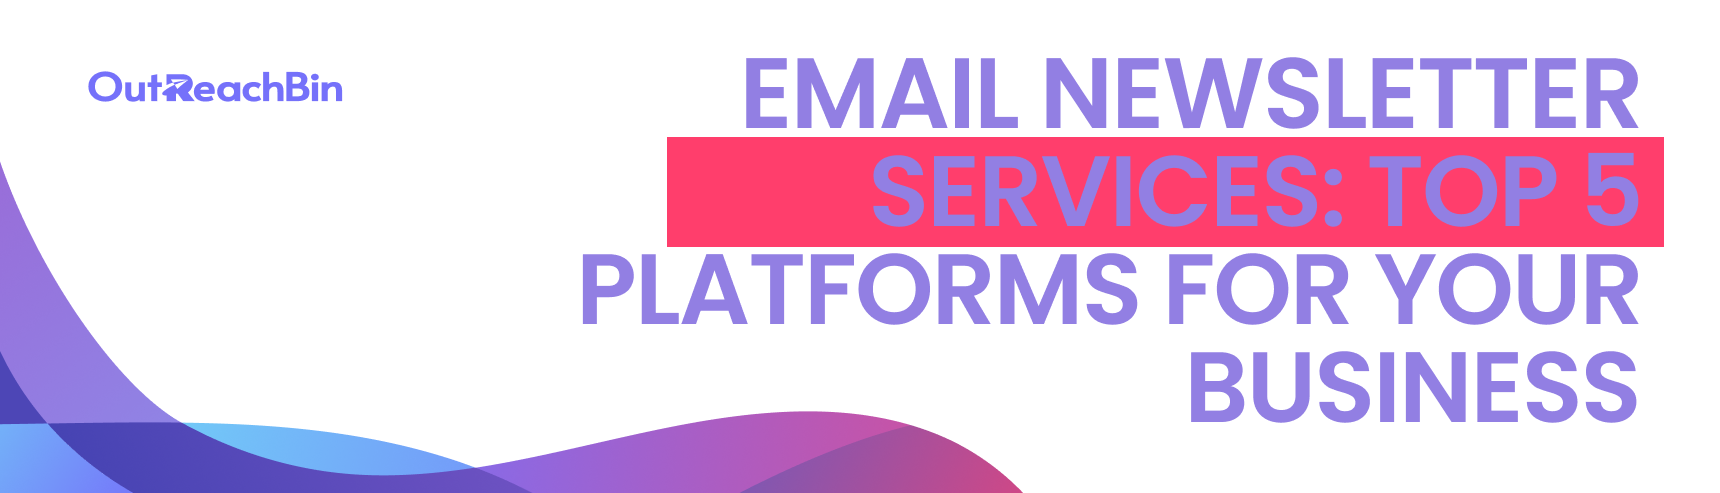 email newsletter services